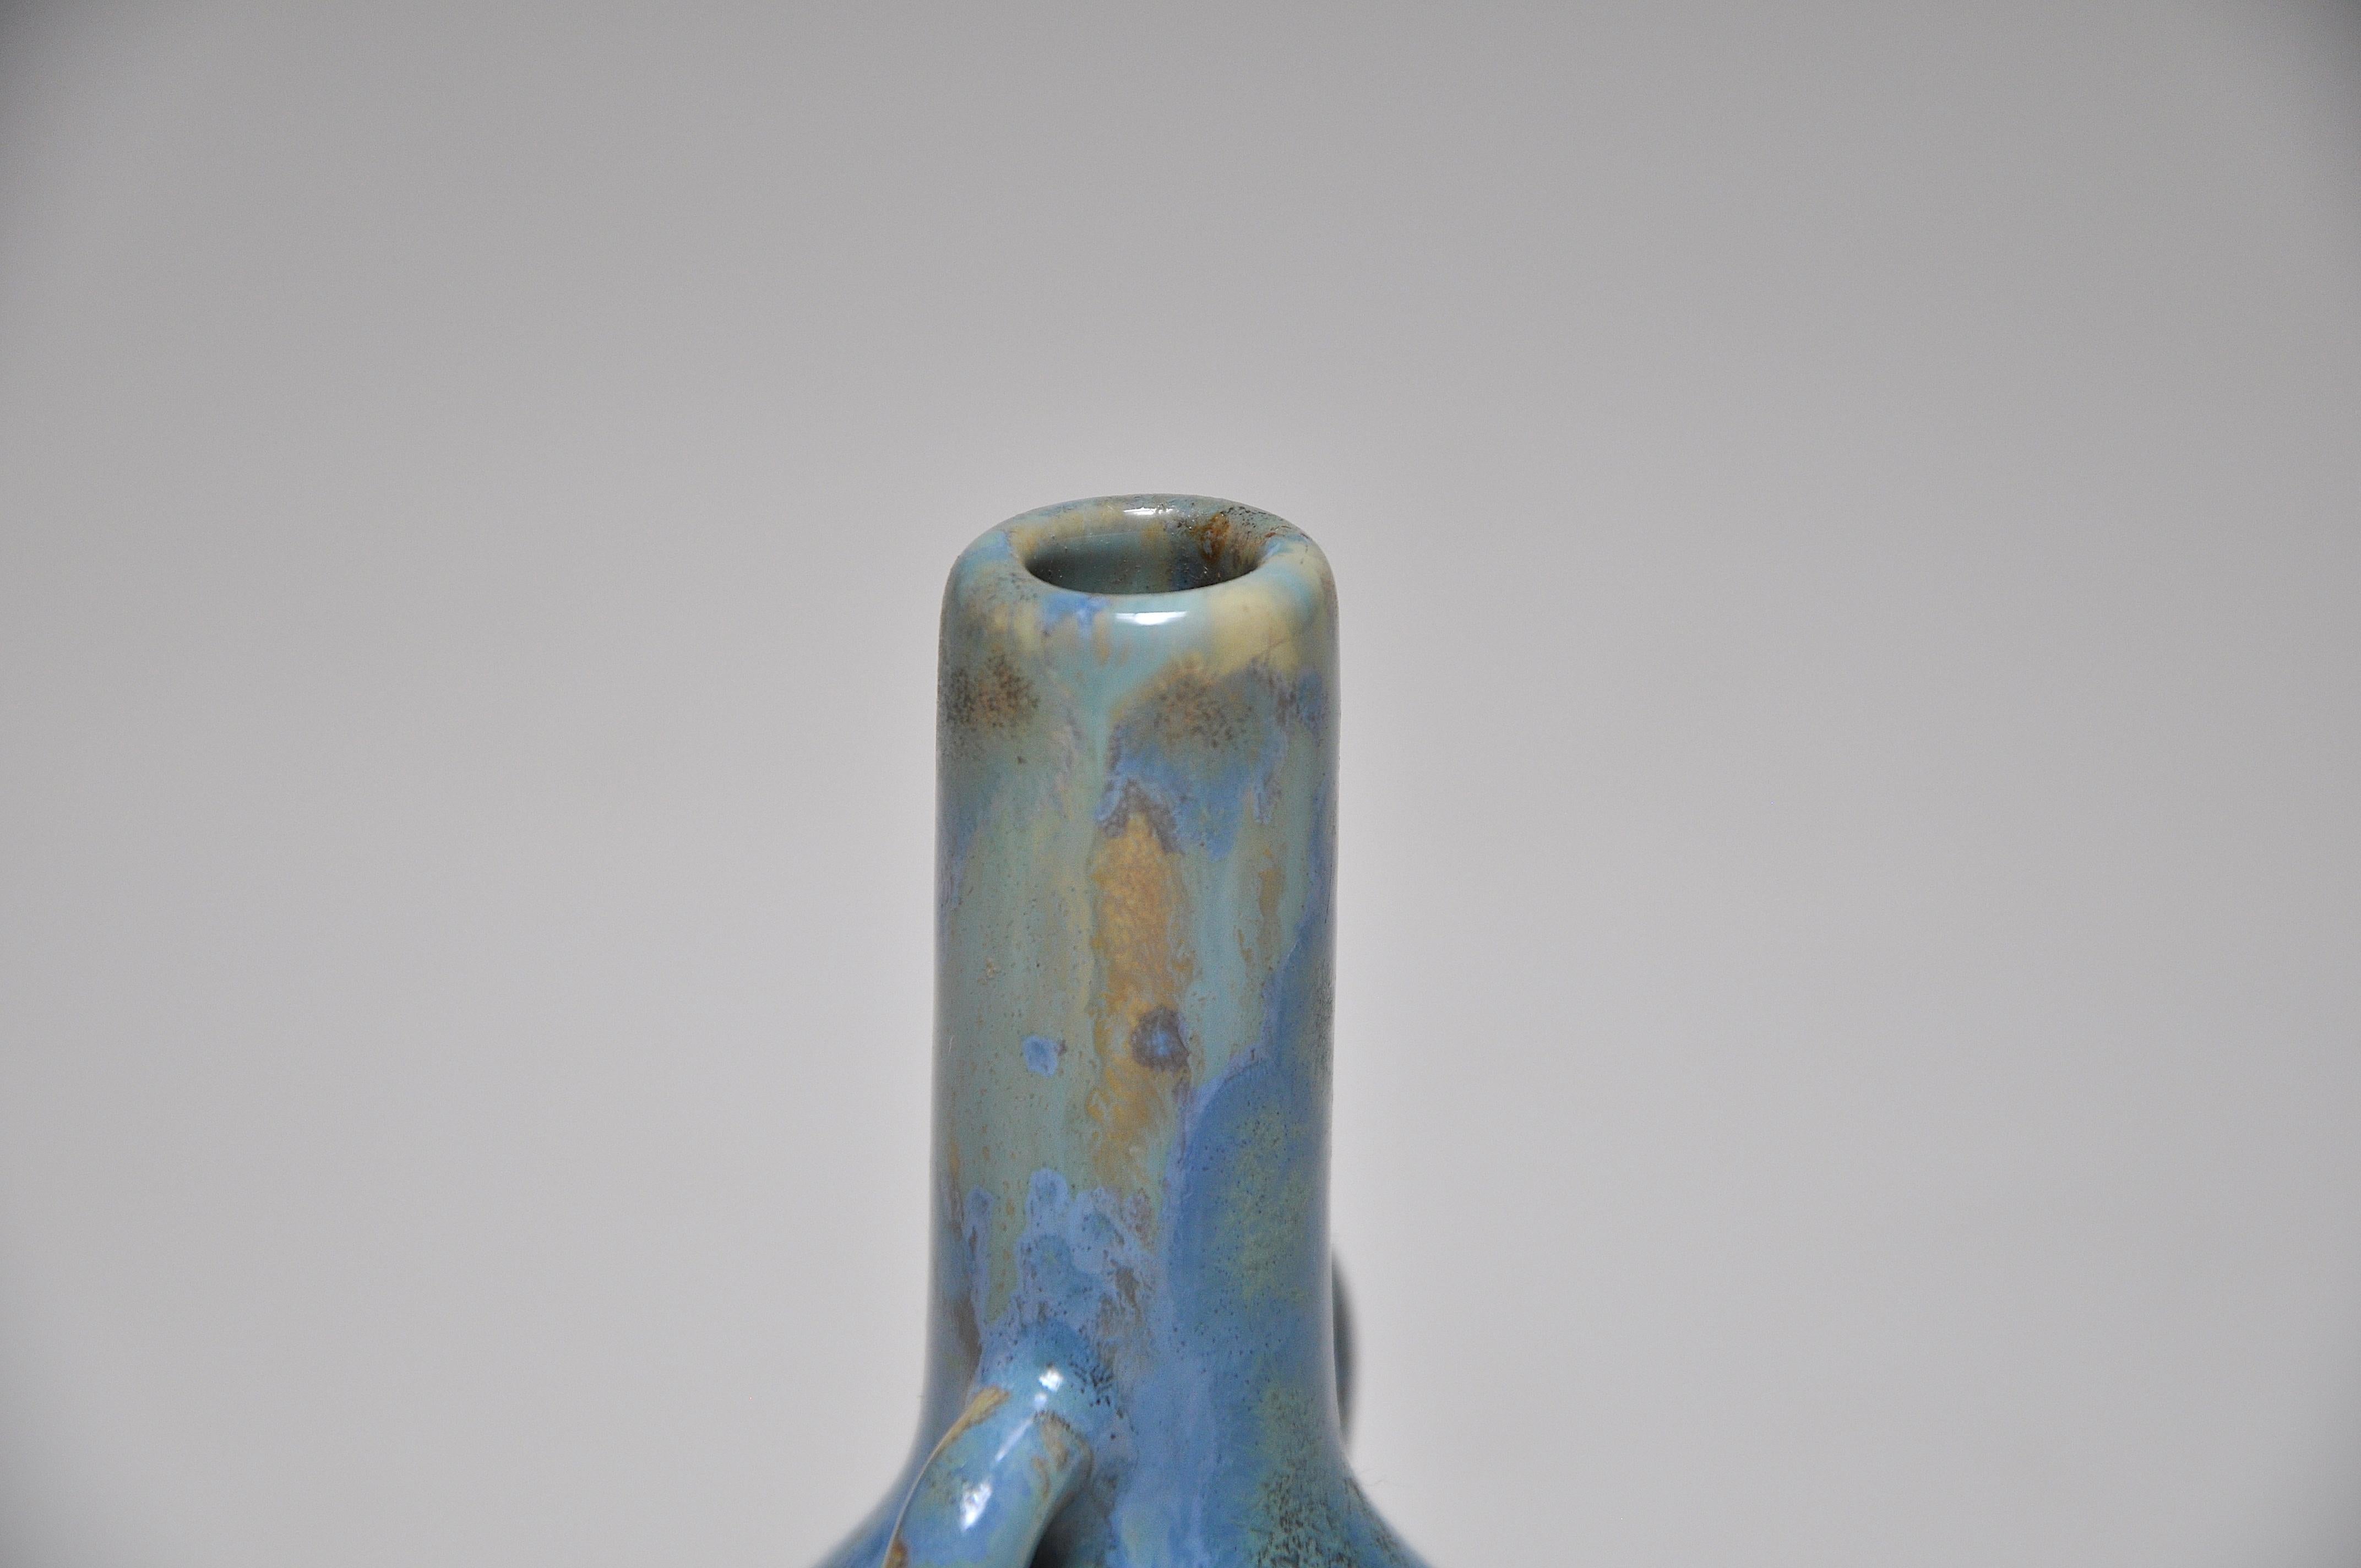 An exquisite rare miniature stoneware vase of bulbous form, with tiny twin handles and a long neck, covered with a flowing strongblue glaze, crystalline in places, on a yellow ground. By the ‘Pierrefonds’ French ceramic studio in Oise, Picardie,